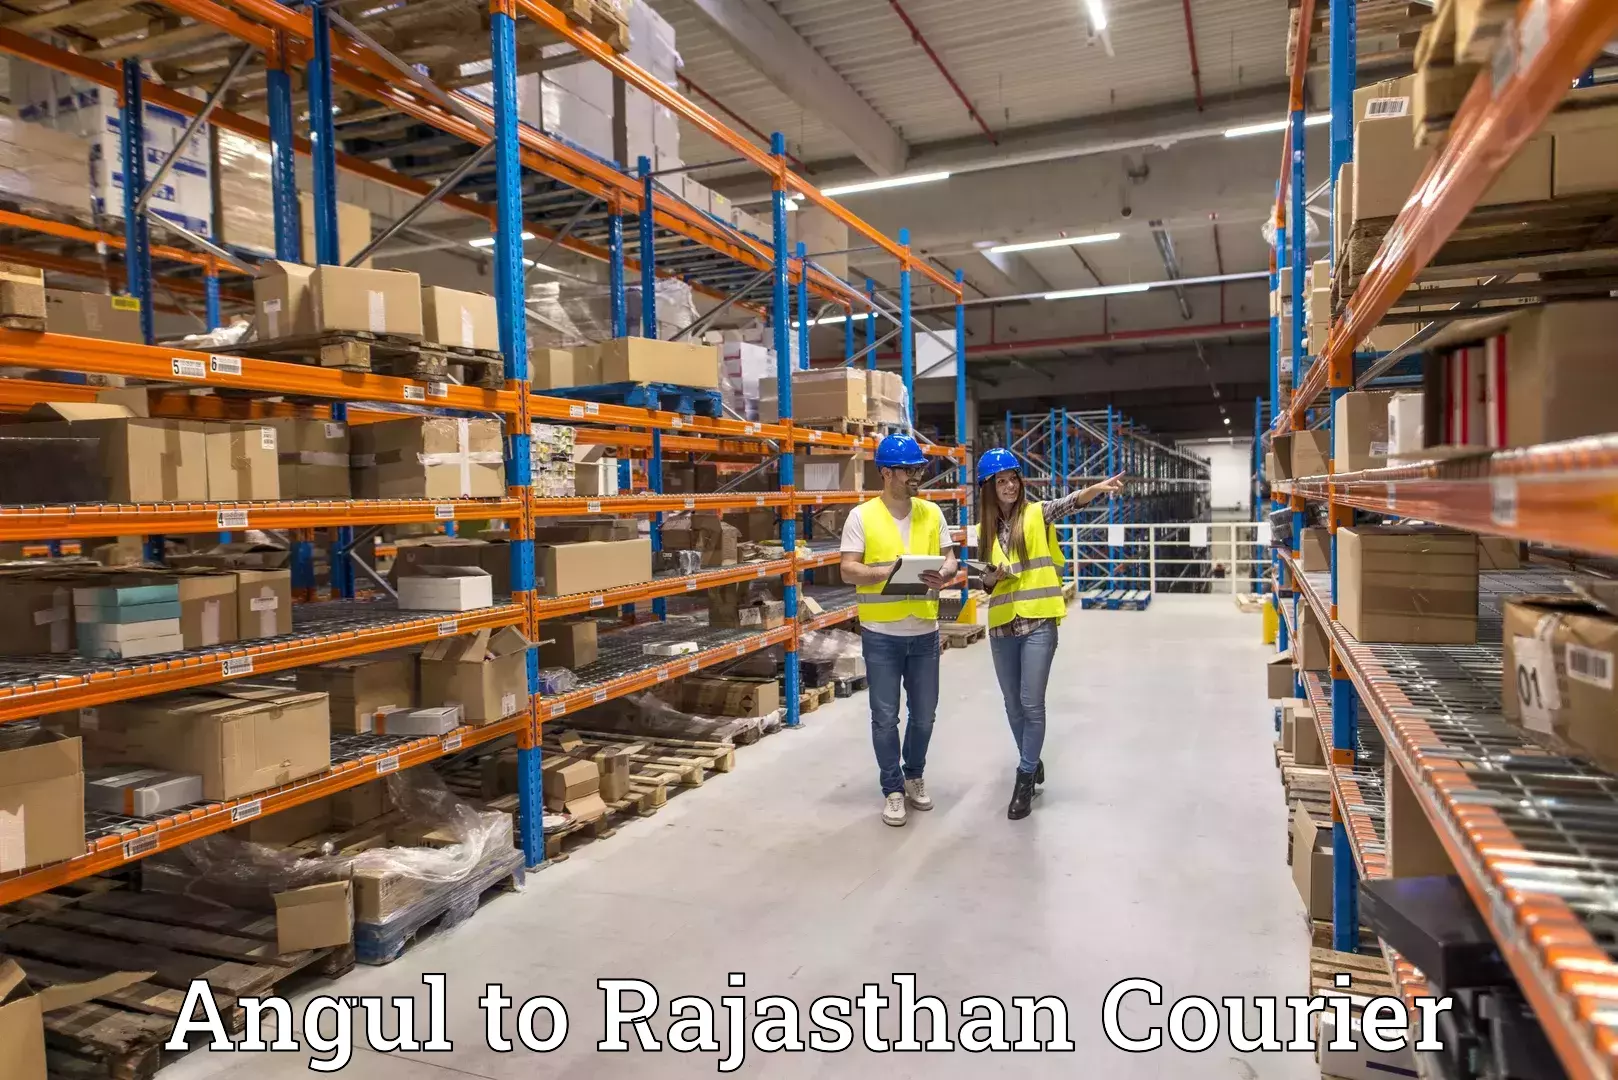 Tech-enabled shipping Angul to Gotan